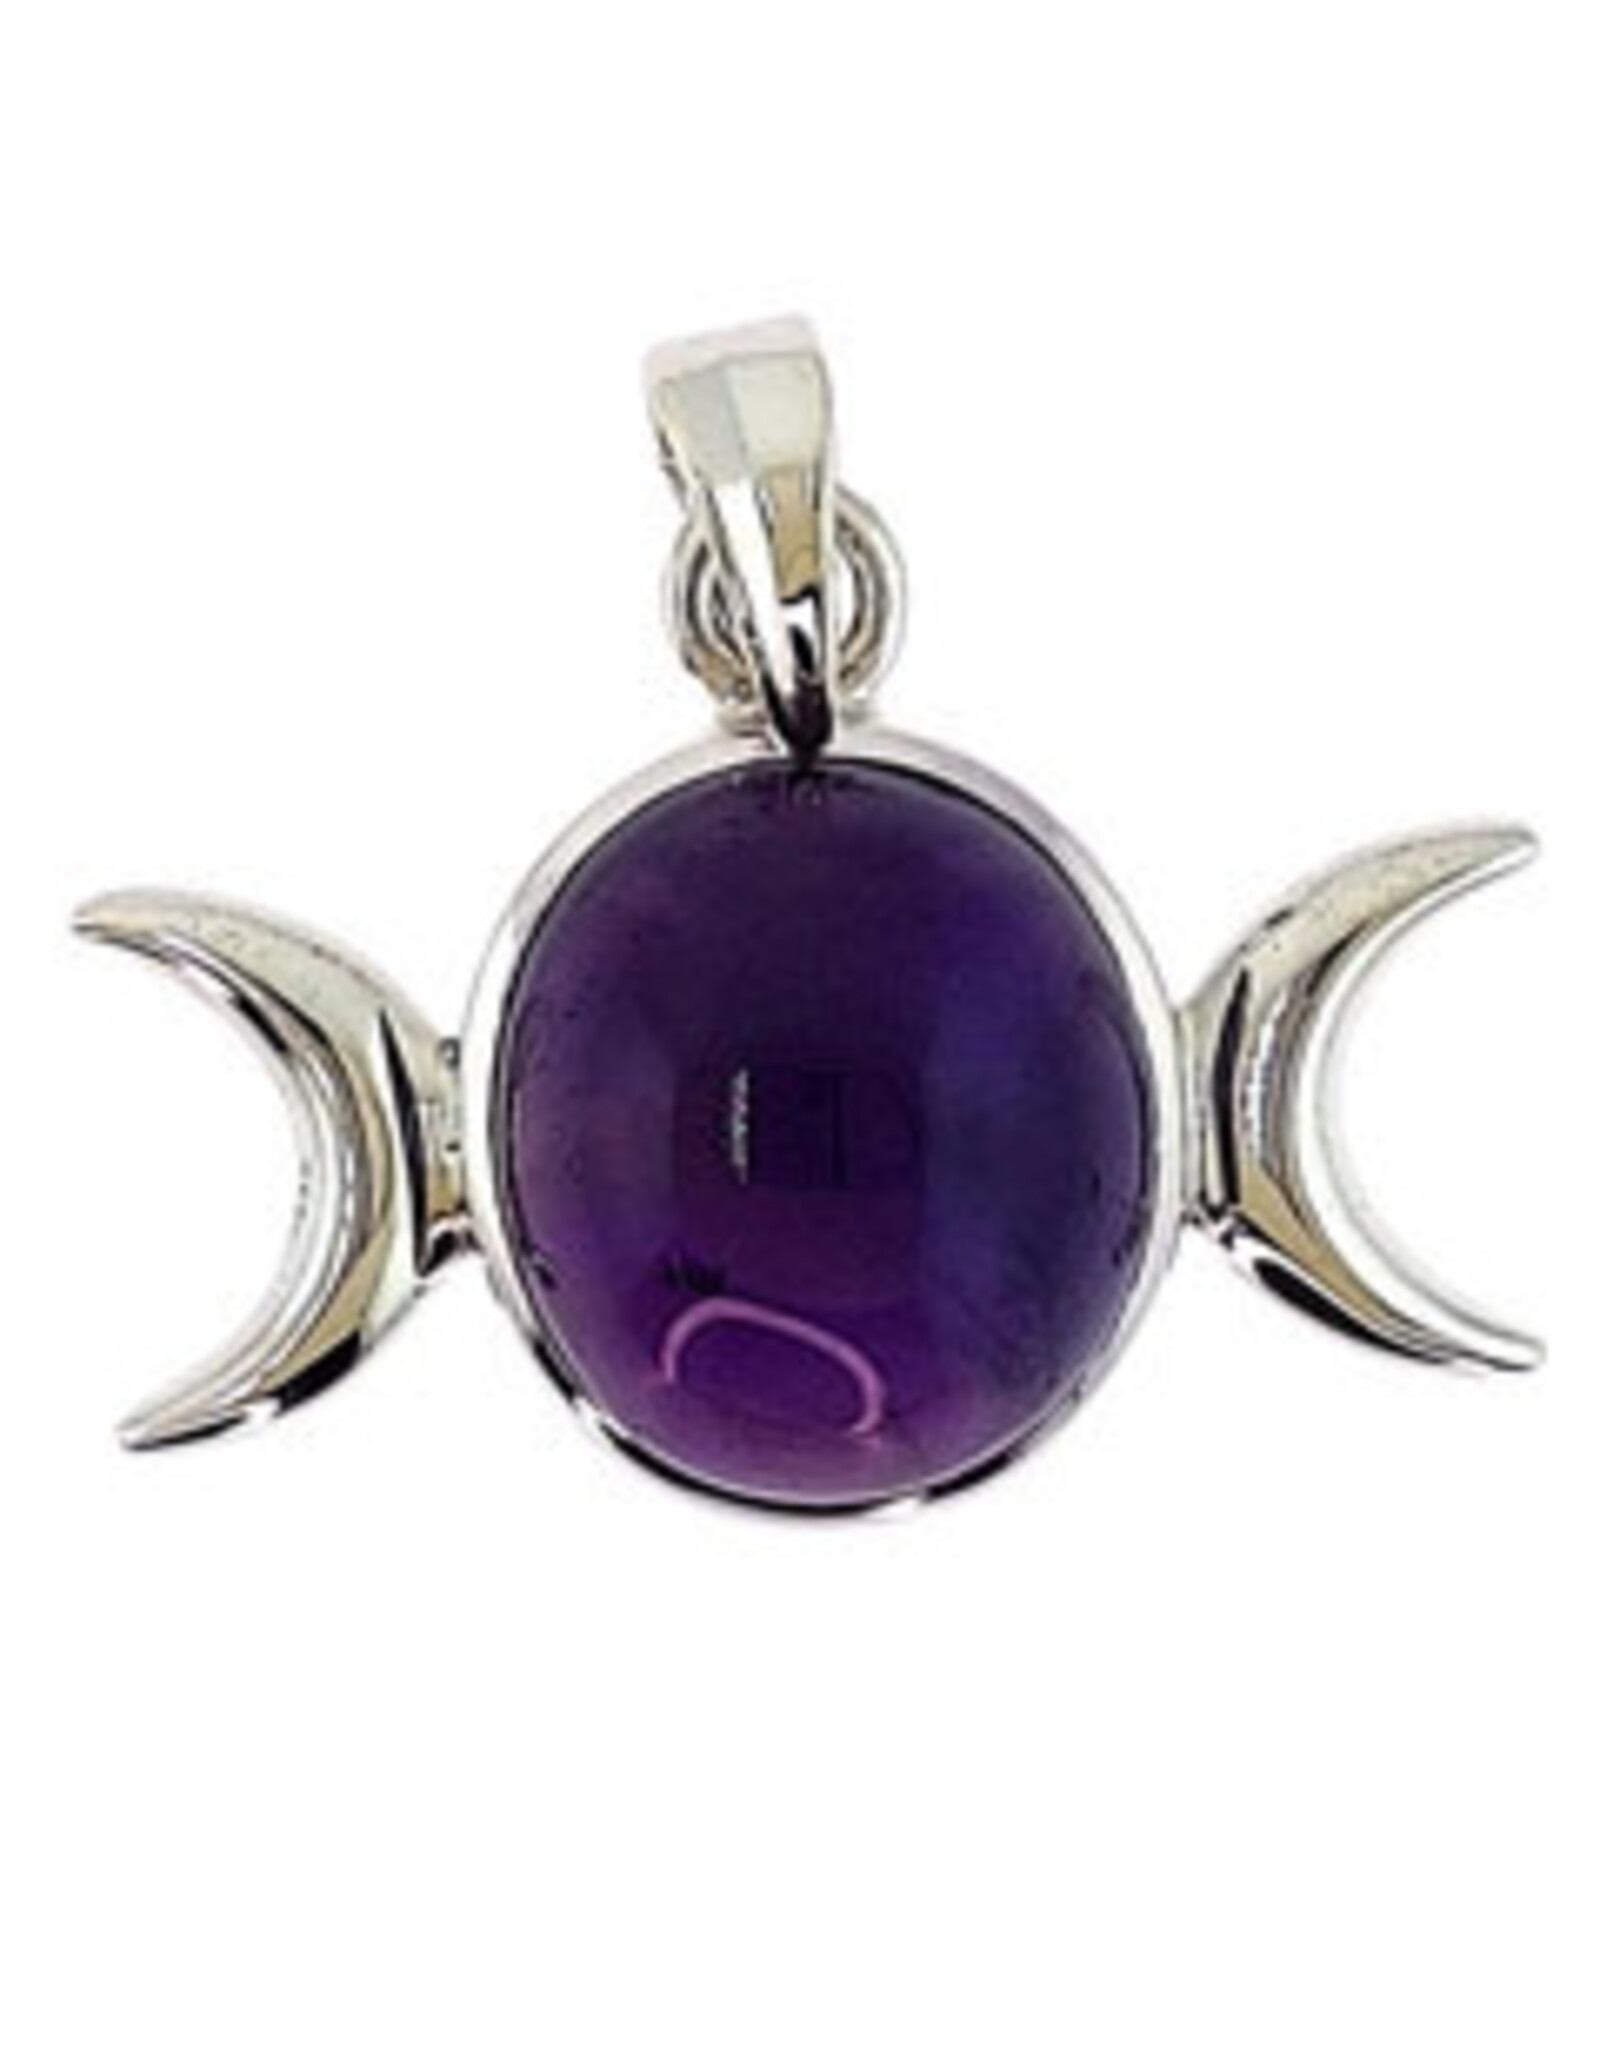 The Triple Goddess Natural Amethyst Pendant Sterling Silver